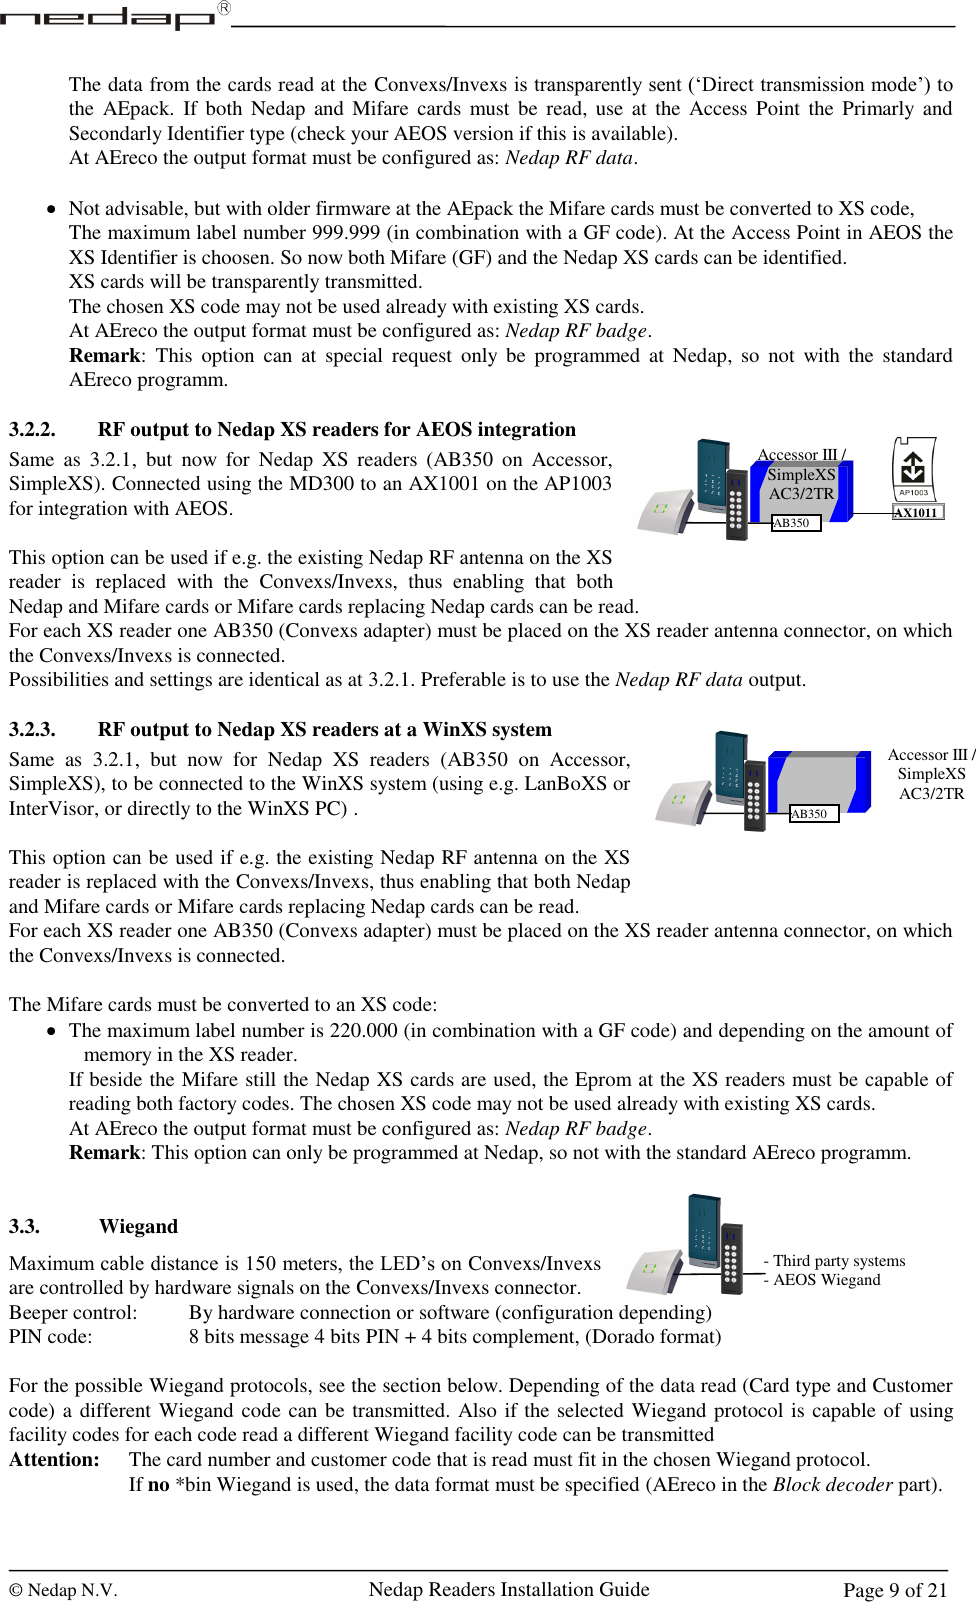  © Nedap N.V.                   Nedap Readers Installation Guide     Page 9 of 21 Accessor III / SimpleXS AC3/2TR AB350 AX1011 The data from the cards read at the Convexs/Invexs is transparently sent (‘Direct transmission mode’) to the  AEpack.  If  both  Nedap  and  Mifare  cards  must be  read, use  at  the  Access Point  the  Primarly and Secondarly Identifier type (check your AEOS version if this is available). At AEreco the output format must be configured as: Nedap RF data.   Not advisable, but with older firmware at the AEpack the Mifare cards must be converted to XS code, The maximum label number 999.999 (in combination with a GF code). At the Access Point in AEOS the XS Identifier is choosen. So now both Mifare (GF) and the Nedap XS cards can be identified.  XS cards will be transparently transmitted. The chosen XS code may not be used already with existing XS cards. At AEreco the output format must be configured as: Nedap RF badge. Remark:  This  option  can  at  special  request  only  be  programmed  at  Nedap,  so  not  with  the  standard AEreco programm.   3.2.2. RF output to Nedap XS readers for AEOS integration Same  as  3.2.1,  but  now  for  Nedap  XS  readers  (AB350  on  Accessor, SimpleXS). Connected using the MD300 to an AX1001 on the AP1003 for integration with AEOS.  This option can be used if e.g. the existing Nedap RF antenna on the XS reader  is  replaced  with  the  Convexs/Invexs,  thus  enabling  that  both Nedap and Mifare cards or Mifare cards replacing Nedap cards can be read. For each XS reader one AB350 (Convexs adapter) must be placed on the XS reader antenna connector, on which the Convexs/Invexs is connected.  Possibilities and settings are identical as at 3.2.1. Preferable is to use the Nedap RF data output.  3.2.3. RF output to Nedap XS readers at a WinXS system Same  as  3.2.1,  but  now  for  Nedap  XS  readers  (AB350  on  Accessor, SimpleXS), to be connected to the WinXS system (using e.g. LanBoXS or InterVisor, or directly to the WinXS PC) .  This option can be used if e.g. the existing Nedap RF antenna on the XS reader is replaced with the Convexs/Invexs, thus enabling that both Nedap and Mifare cards or Mifare cards replacing Nedap cards can be read. For each XS reader one AB350 (Convexs adapter) must be placed on the XS reader antenna connector, on which the Convexs/Invexs is connected.  The Mifare cards must be converted to an XS code:  The maximum label number is 220.000 (in combination with a GF code) and depending on the amount of memory in the XS reader. If beside the Mifare still the Nedap XS cards are used, the Eprom at the XS readers must be capable of reading both factory codes. The chosen XS code may not be used already with existing XS cards. At AEreco the output format must be configured as: Nedap RF badge. Remark: This option can only be programmed at Nedap, so not with the standard AEreco programm.    3.3. Wiegand Maximum cable distance is 150 meters, the LED’s on Convexs/Invexs are controlled by hardware signals on the Convexs/Invexs connector.  Beeper control:    By hardware connection or software (configuration depending) PIN code:       8 bits message 4 bits PIN + 4 bits complement, (Dorado format)  For the possible Wiegand protocols, see the section below. Depending of the data read (Card type and Customer code) a different Wiegand code can be transmitted. Also if the selected Wiegand protocol is capable of  using facility codes for each code read a different Wiegand facility code can be transmitted Attention:  The card number and customer code that is read must fit in the chosen Wiegand protocol.     If no *bin Wiegand is used, the data format must be specified (AEreco in the Block decoder part).  - Third party systems - AEOS Wiegand Accessor III / SimpleXS AC3/2TR AB350 1 2 3 4 5 6 7 8 9 C 0 E 1 2 3 4 5 6 7 8 9 C 0 E 1 2 3 4 5 6 7 8 9 C 0 E 